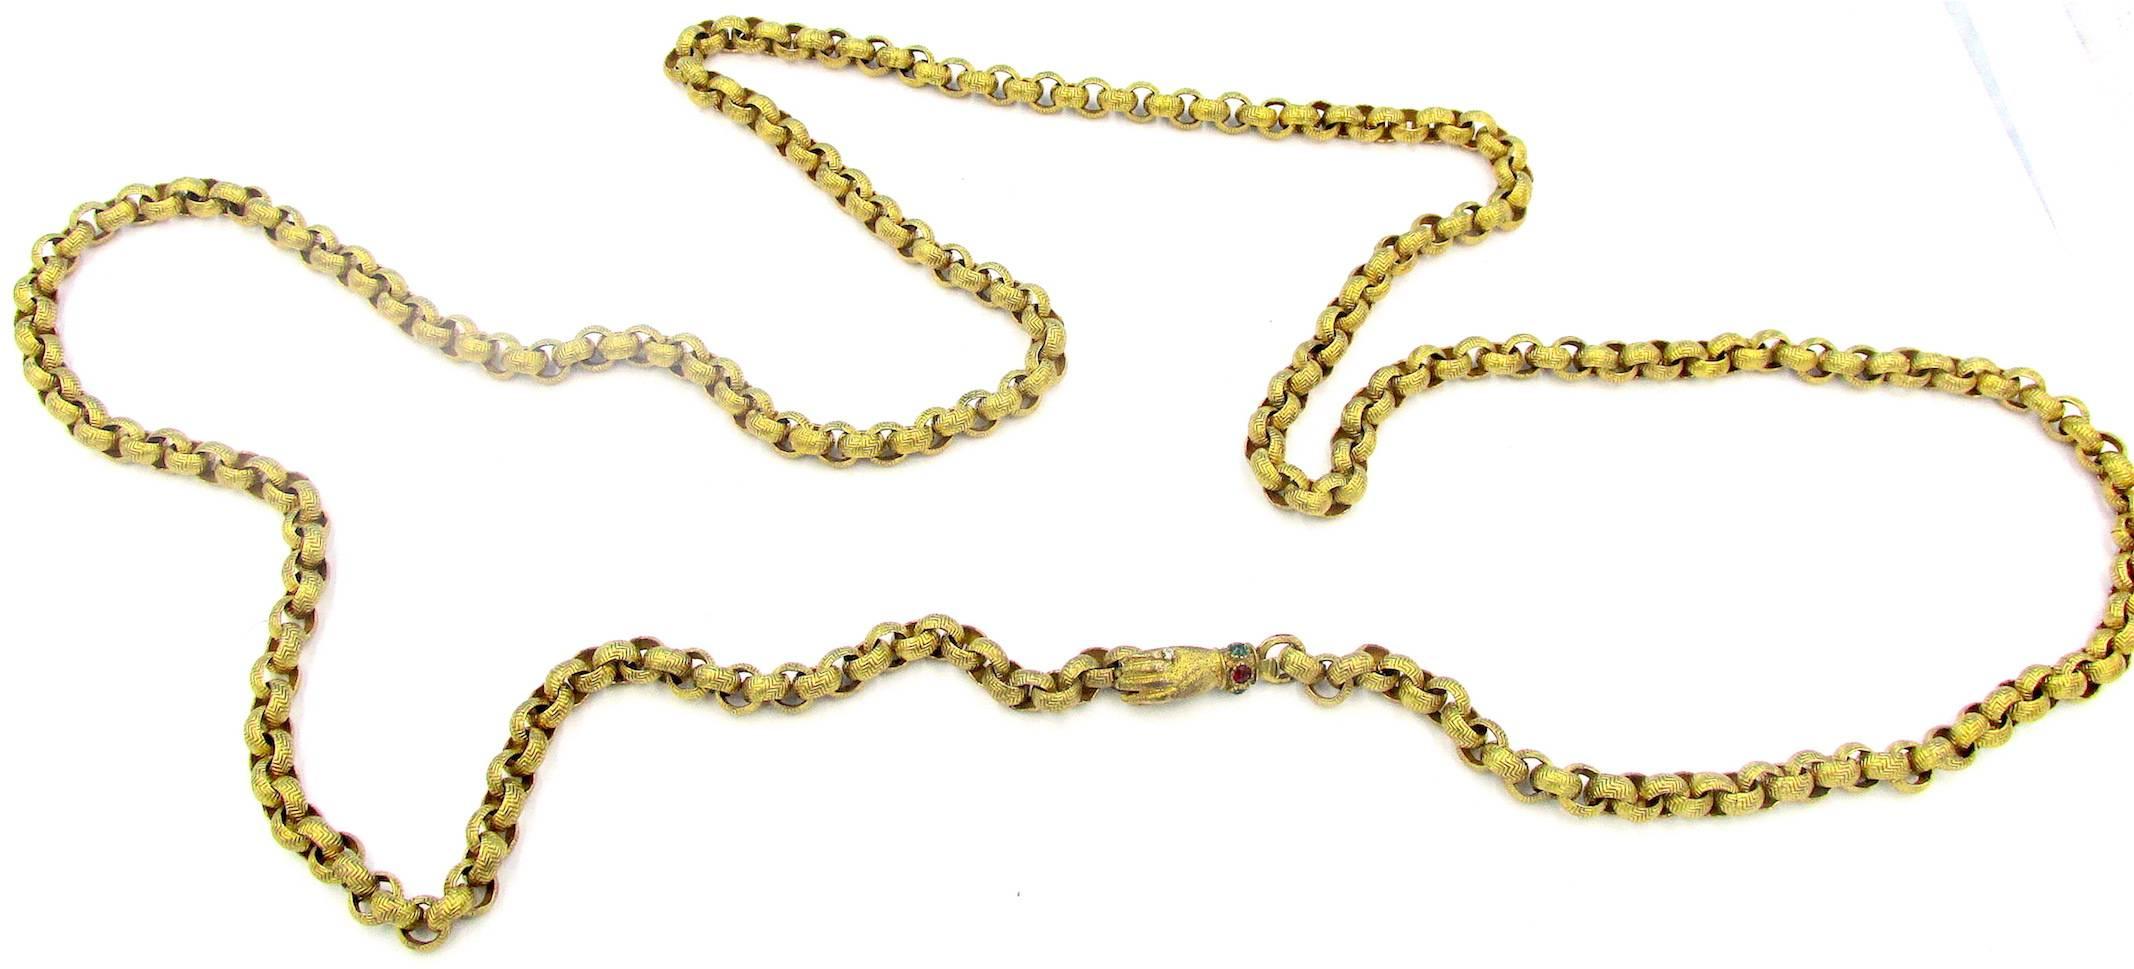 Fabulous Georgian Pinchbeck muff chain with a hand clasp set with colored paste stones. Christopher Pinchbeck developed an alloy of copper and zinc in 1720 that had the look of real gold and did not tarnish. The jewelry made with this alloy survives